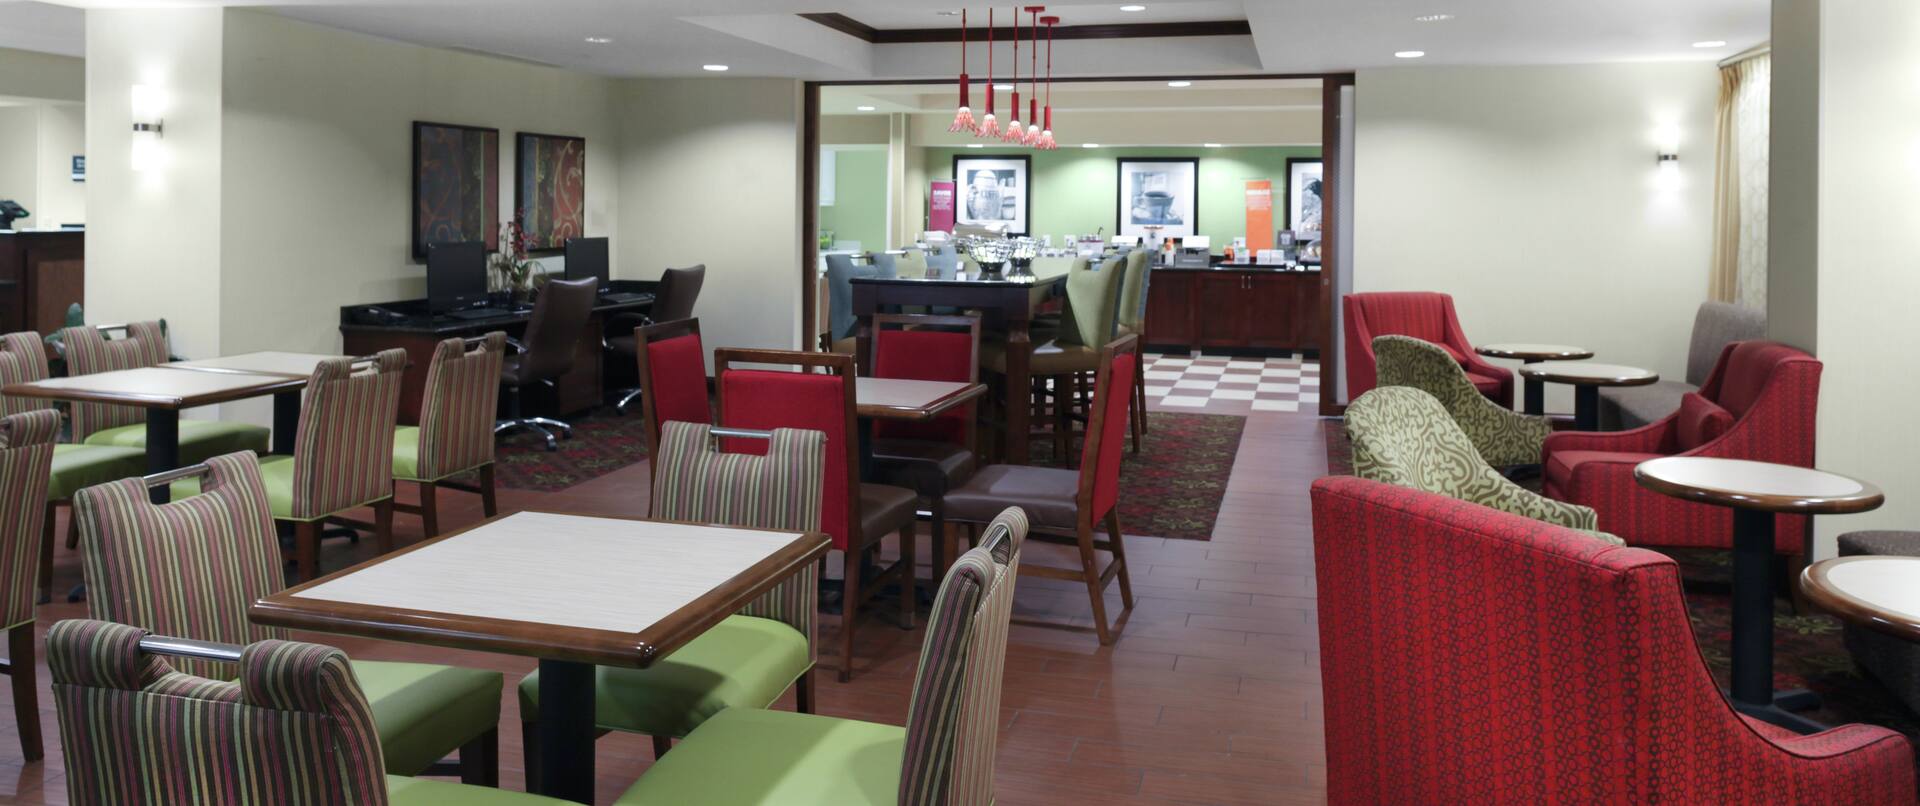 Lobby and Dining Area